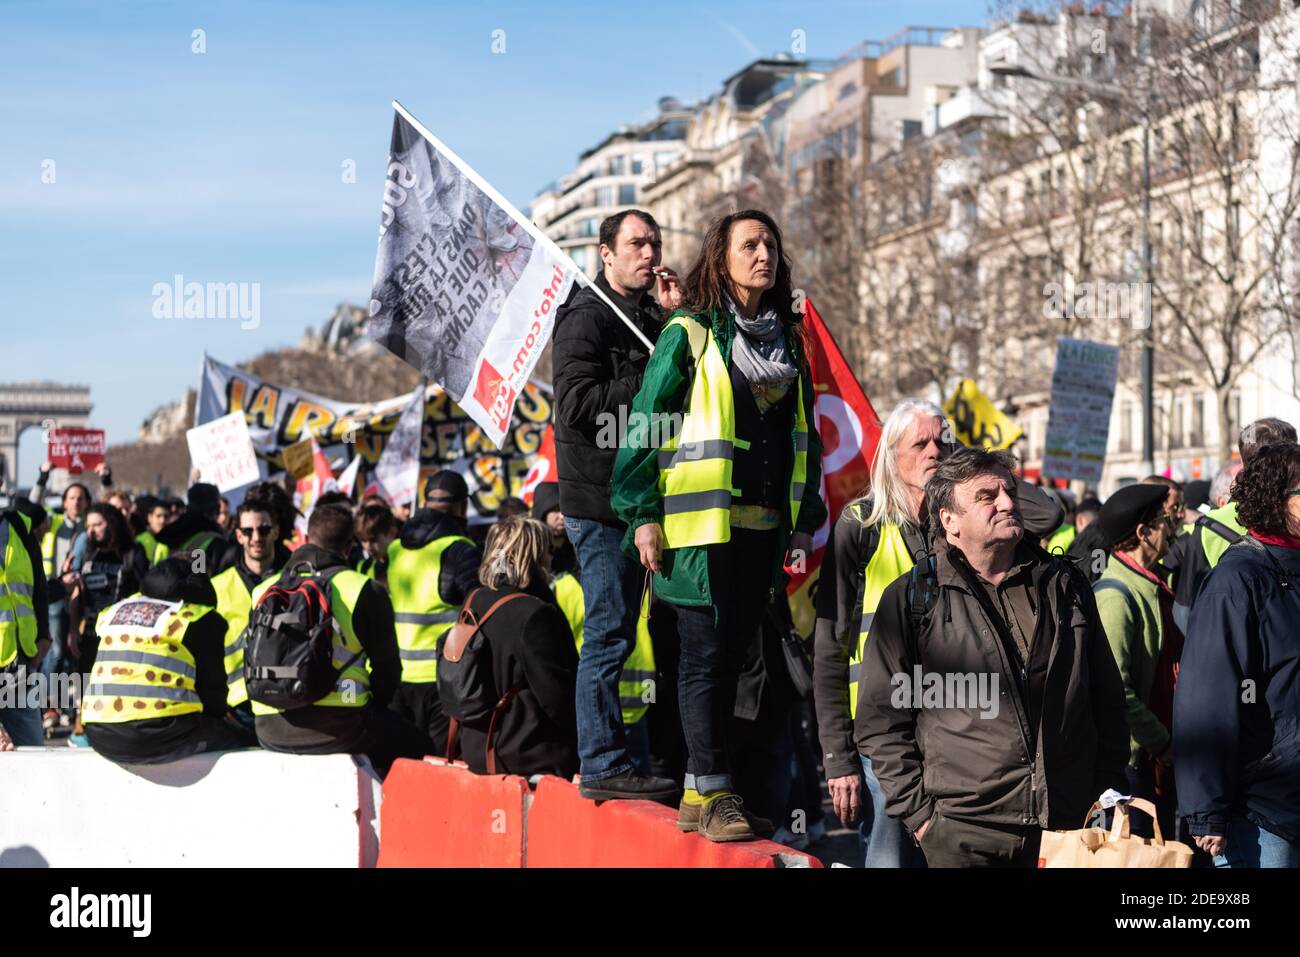 To celebrate the 3 months of the Yellow Vests (Gilets Jaunes) movement, a  few hundred people gathered on the Champs-Elysées to participate in a  peaceful march towards the Champ de Mars. So